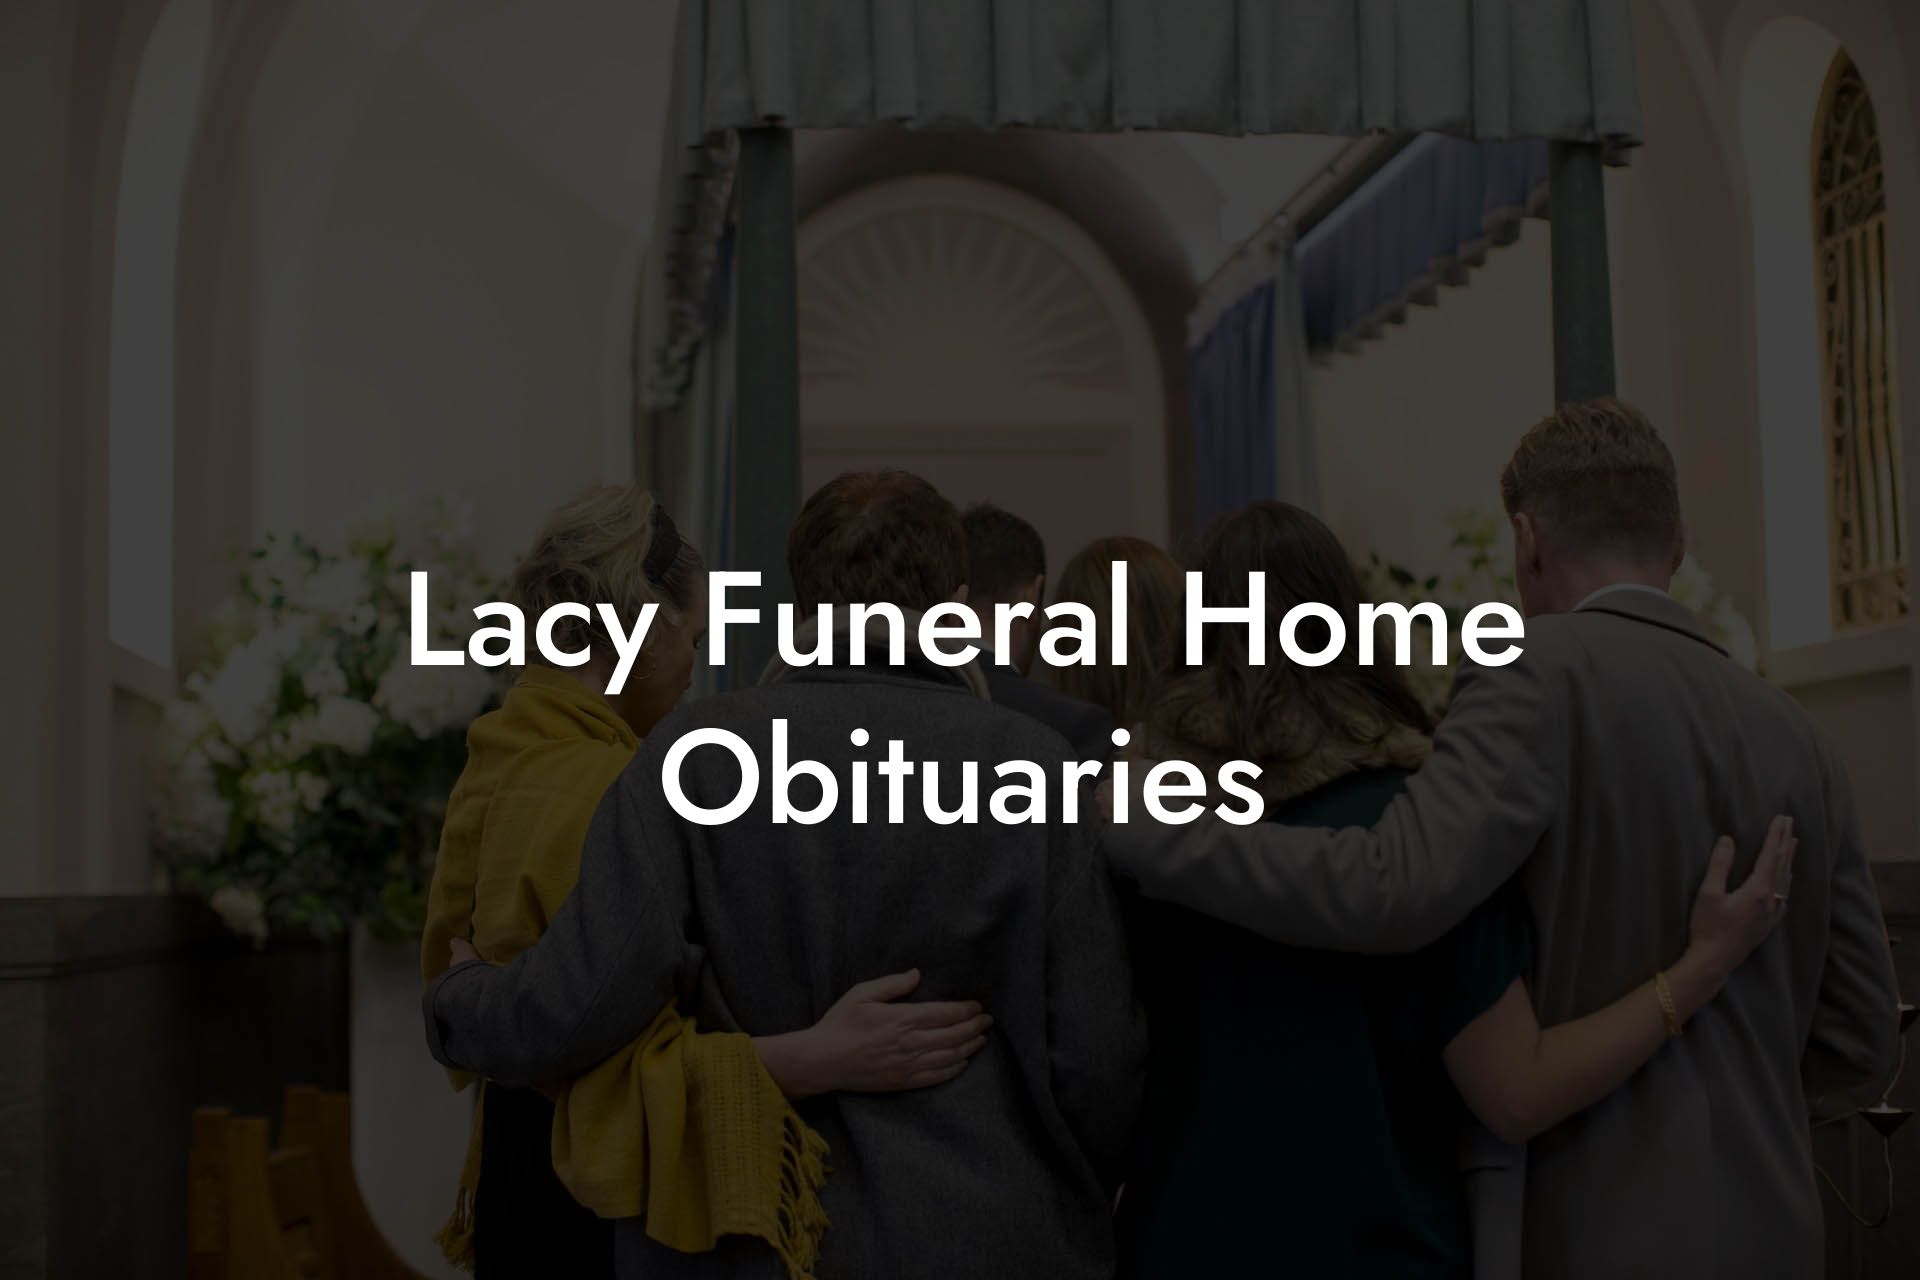 Lacy Funeral Home Obituaries